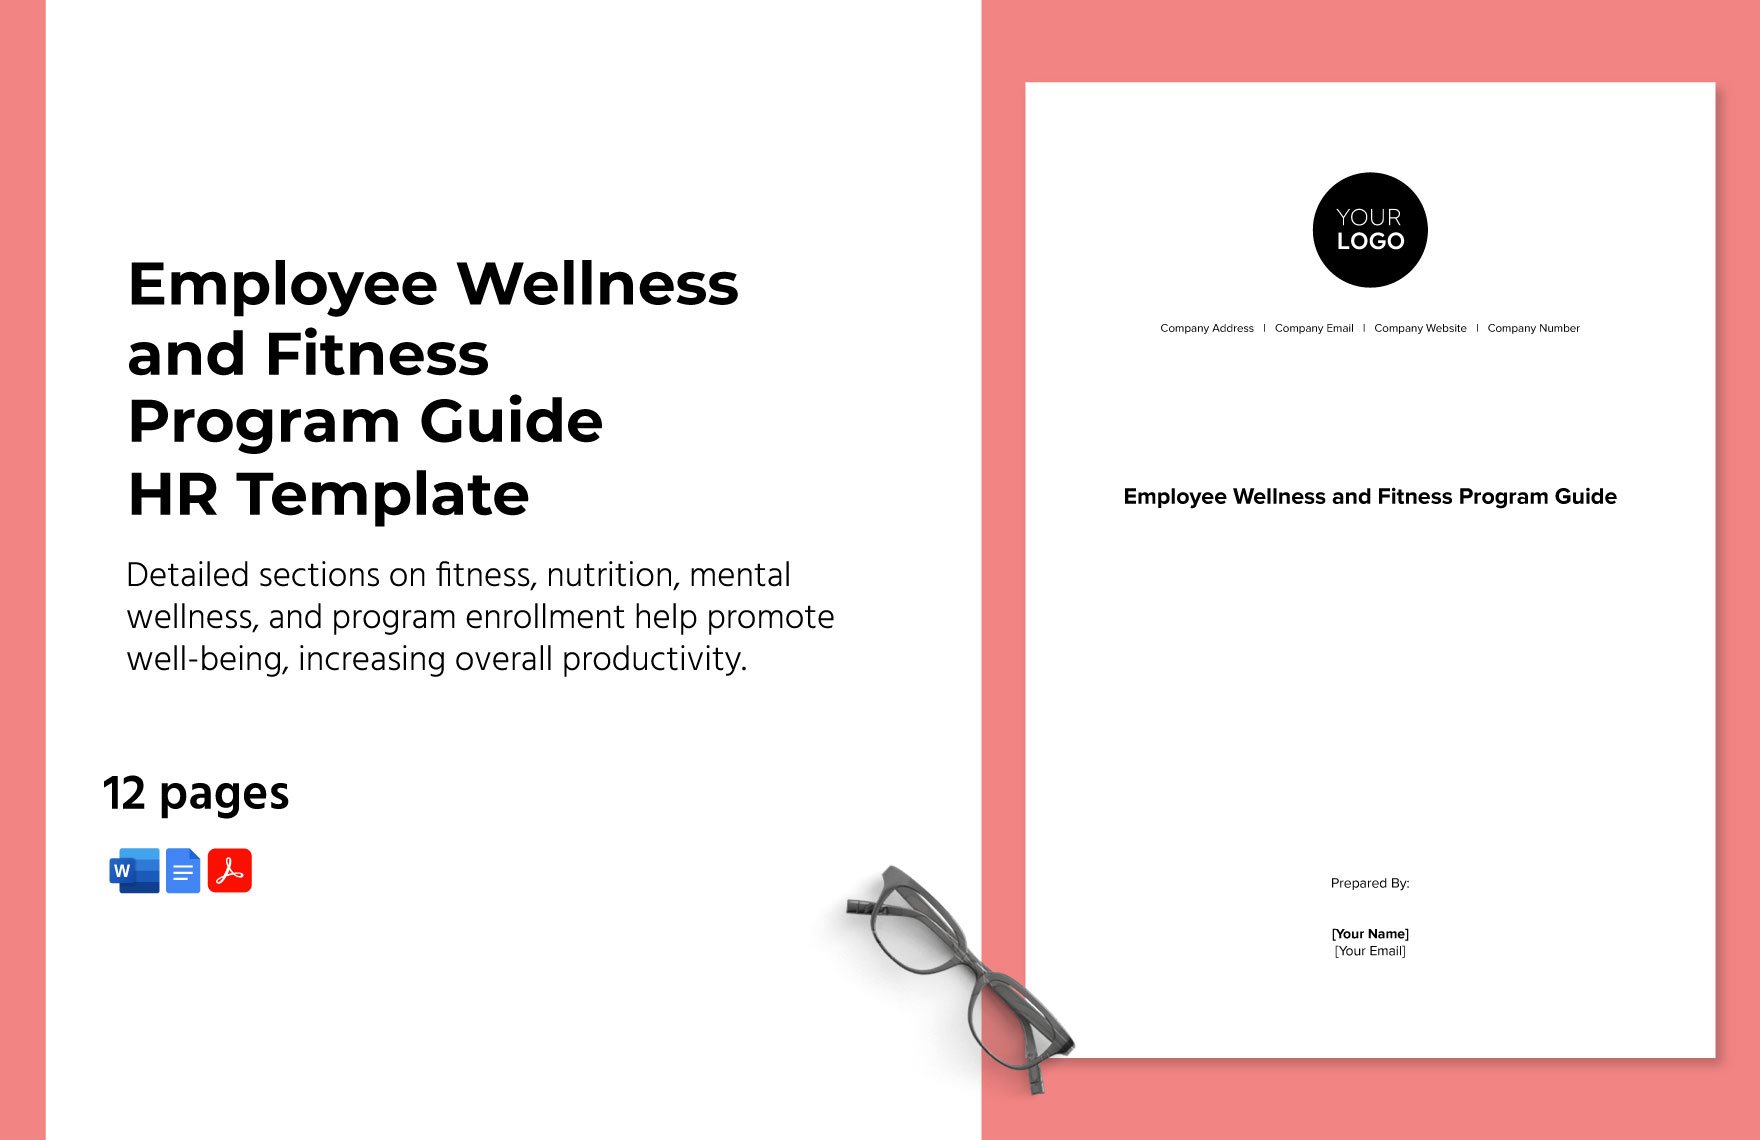 Employee Wellness and Fitness Program Guide HR Template